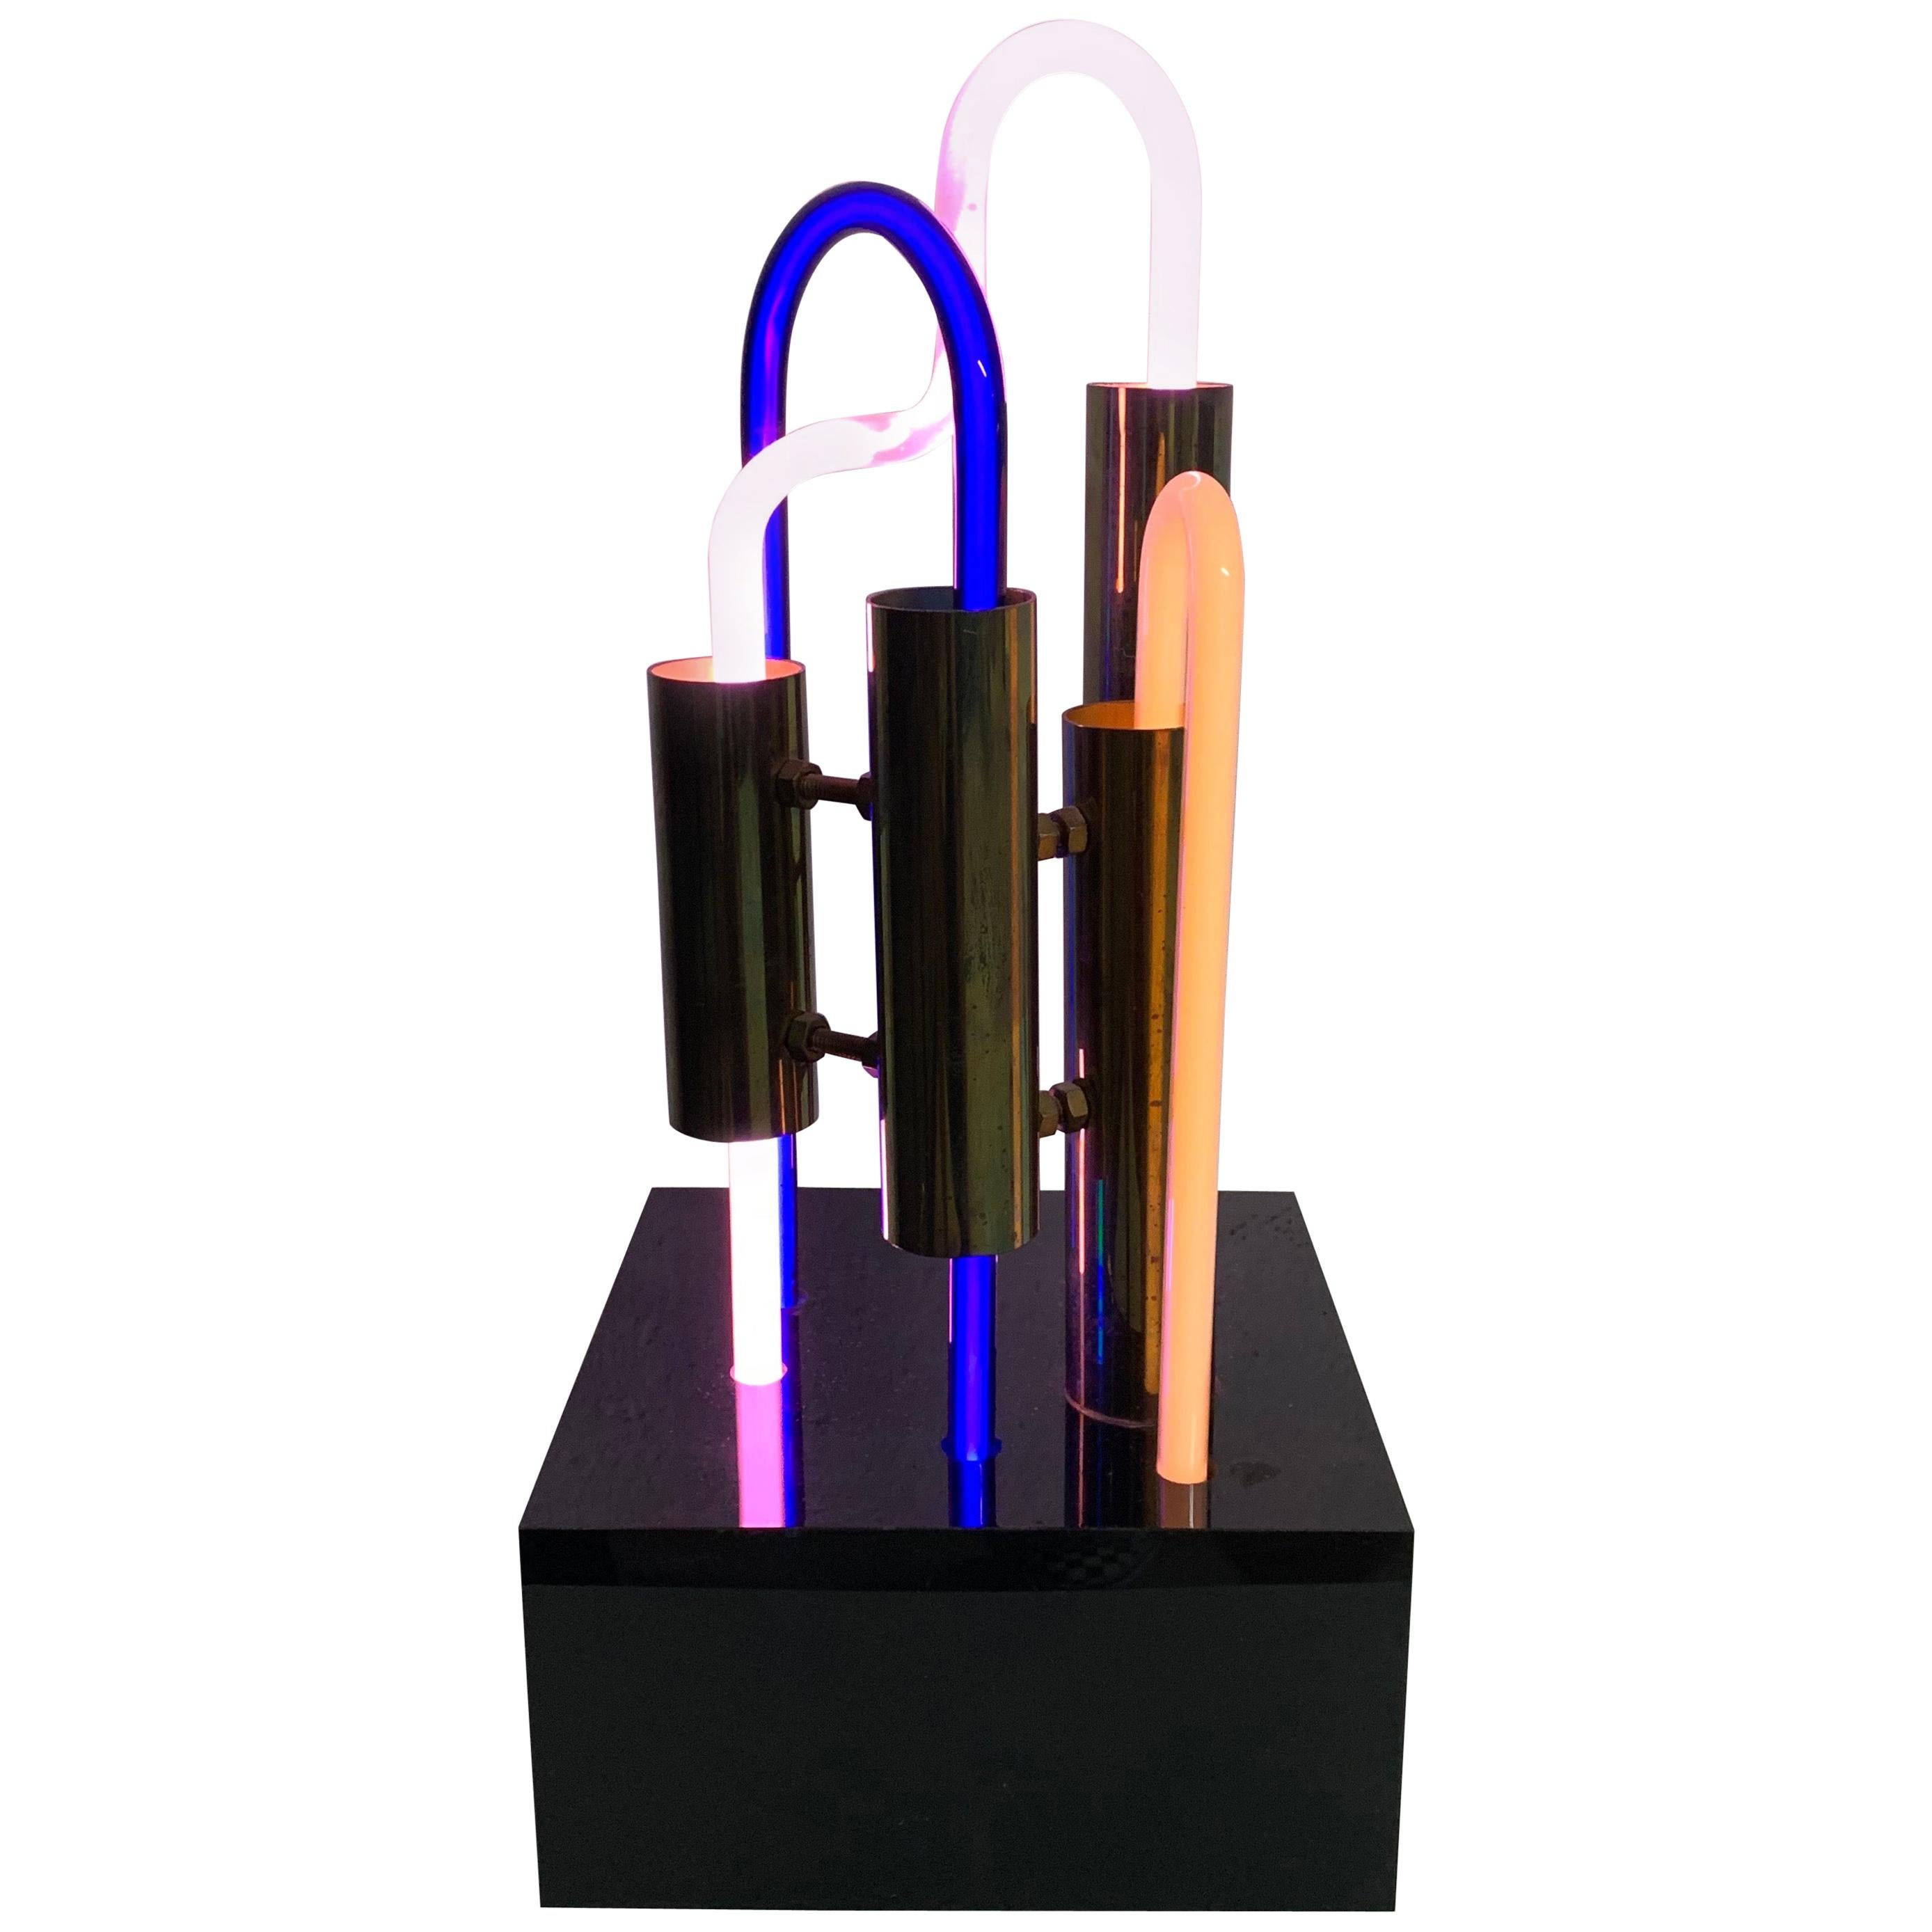 VCK, ALS #3 Neon Brass and Lucite Sculpture Lamp, Signed, 1985